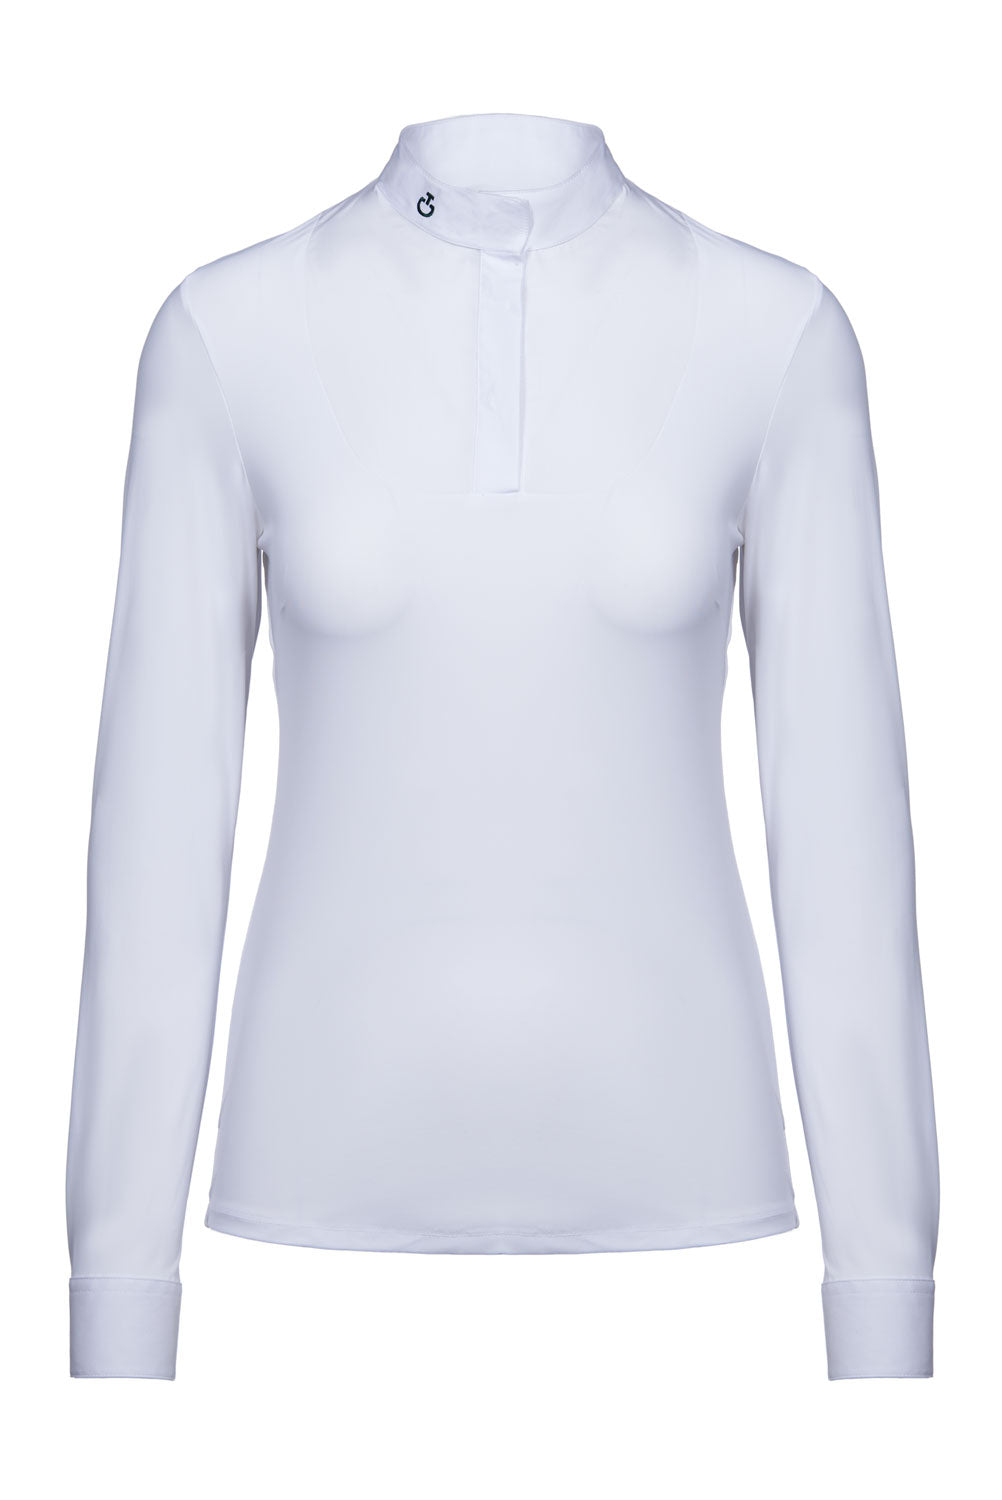 Cavalleria Toscana LS Shirt with Bib and Jacquard Back - Luxe EQ